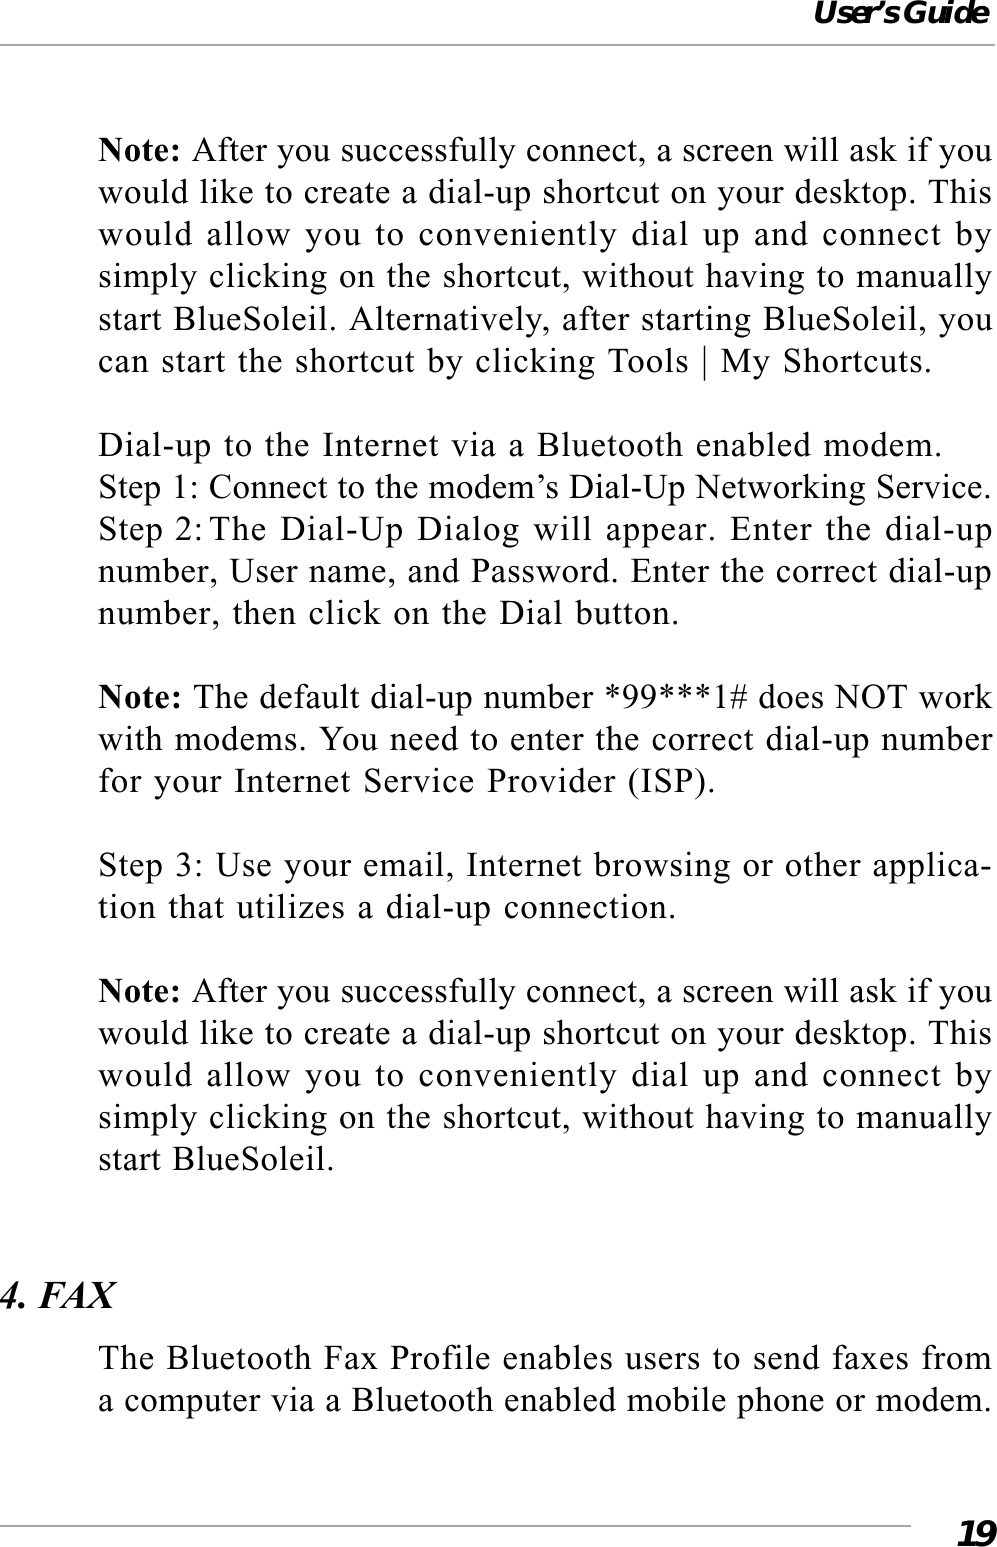 User’s Guide19Note: After you successfully connect, a screen will ask if youwould like to create a dial-up shortcut on your desktop. Thiswould allow you to conveniently dial up and connect bysimply clicking on the shortcut, without having to manuallystart BlueSoleil. Alternatively, after starting BlueSoleil, youcan start the shortcut by clicking Tools | My Shortcuts.Dial-up to the Internet via a Bluetooth enabled modem.Step 1: Connect to the modem’s Dial-Up Networking Service.Step 2: The Dial-Up Dialog will appear. Enter the dial-upnumber, User name, and Password. Enter the correct dial-upnumber, then click on the Dial button.Note: The default dial-up number *99***1# does NOT workwith modems. You need to enter the correct dial-up numberfor your Internet Service Provider (ISP).Step 3: Use your email, Internet browsing or other applica-tion that utilizes a dial-up connection.Note: After you successfully connect, a screen will ask if youwould like to create a dial-up shortcut on your desktop. Thiswould allow you to conveniently dial up and connect bysimply clicking on the shortcut, without having to manuallystart BlueSoleil.4. FAXThe Bluetooth Fax Profile enables users to send faxes froma computer via a Bluetooth enabled mobile phone or modem.